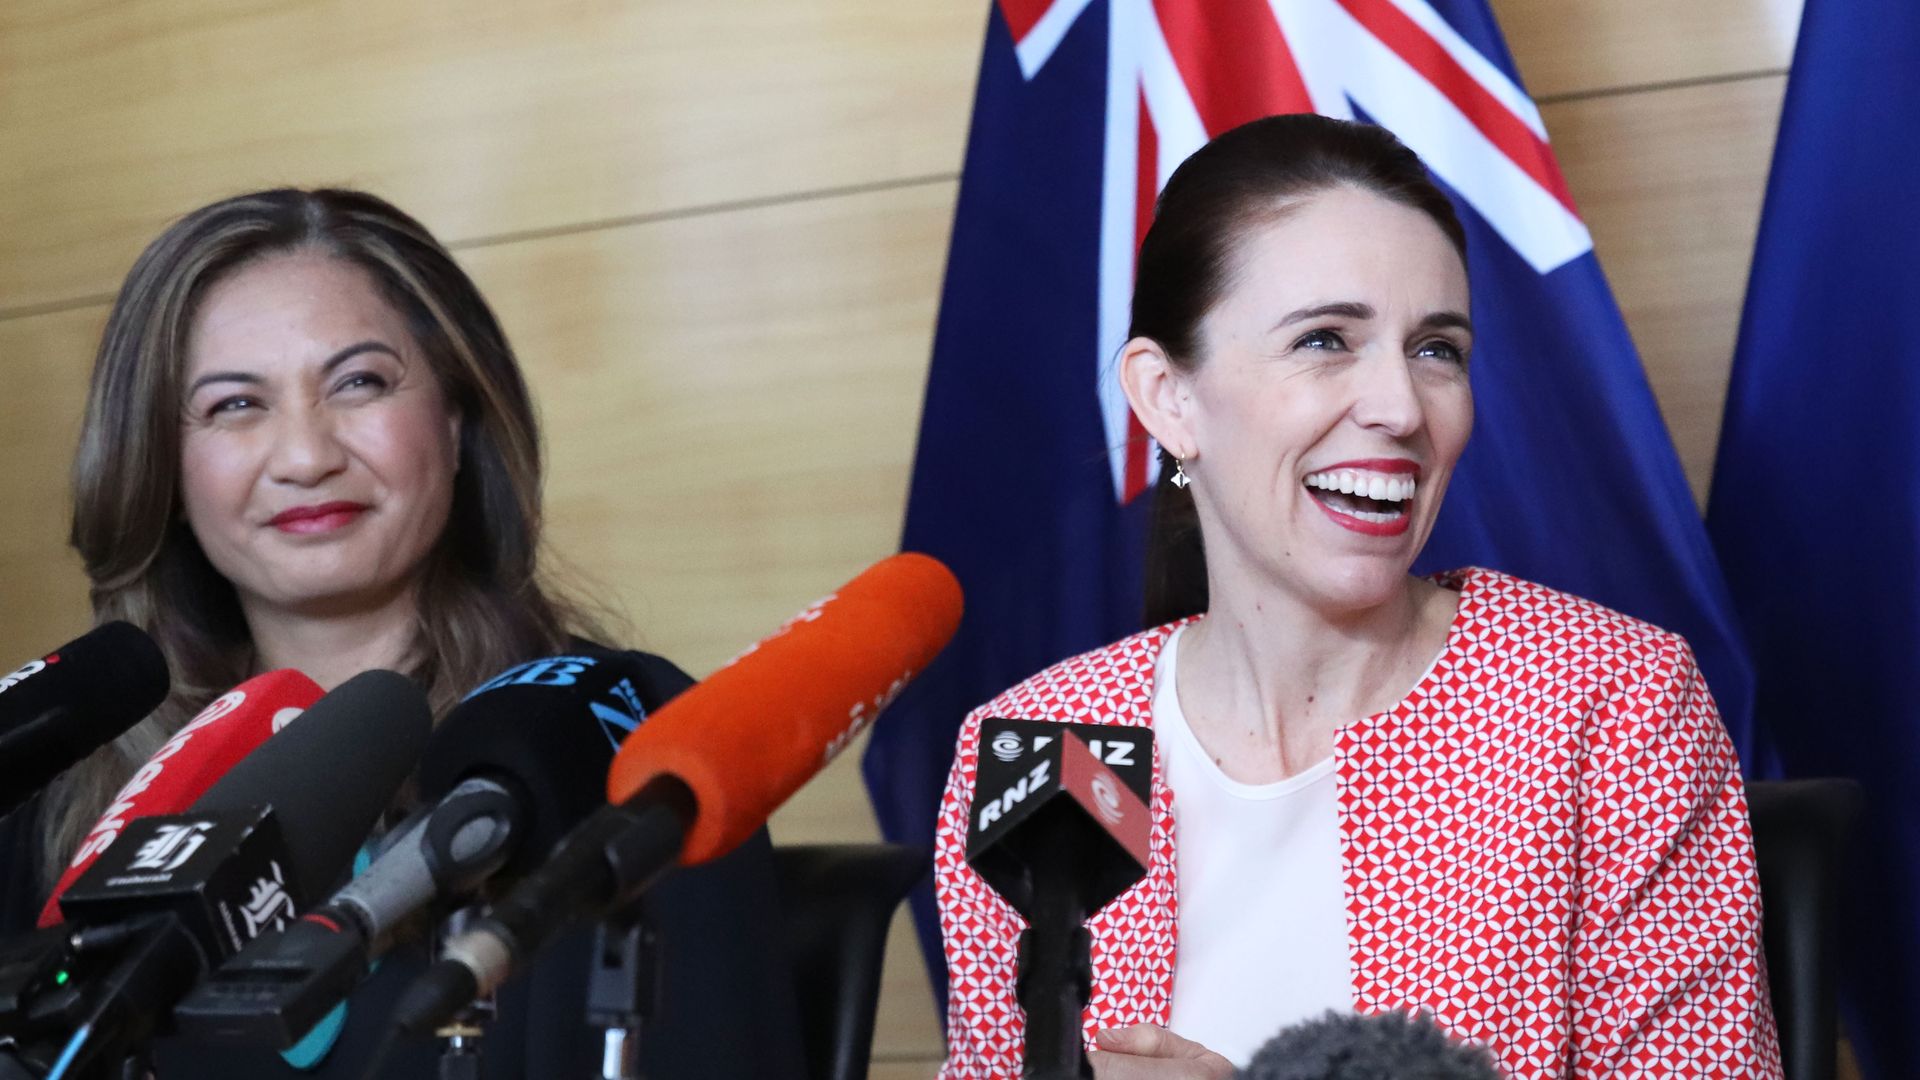 New Zealand Labour leader (and re-elected Prime Minister) Jacinda Ardern, seated next to Green Party co-leader Marama Davidson, smiles after signing a co-operation agreement on November 01 local time